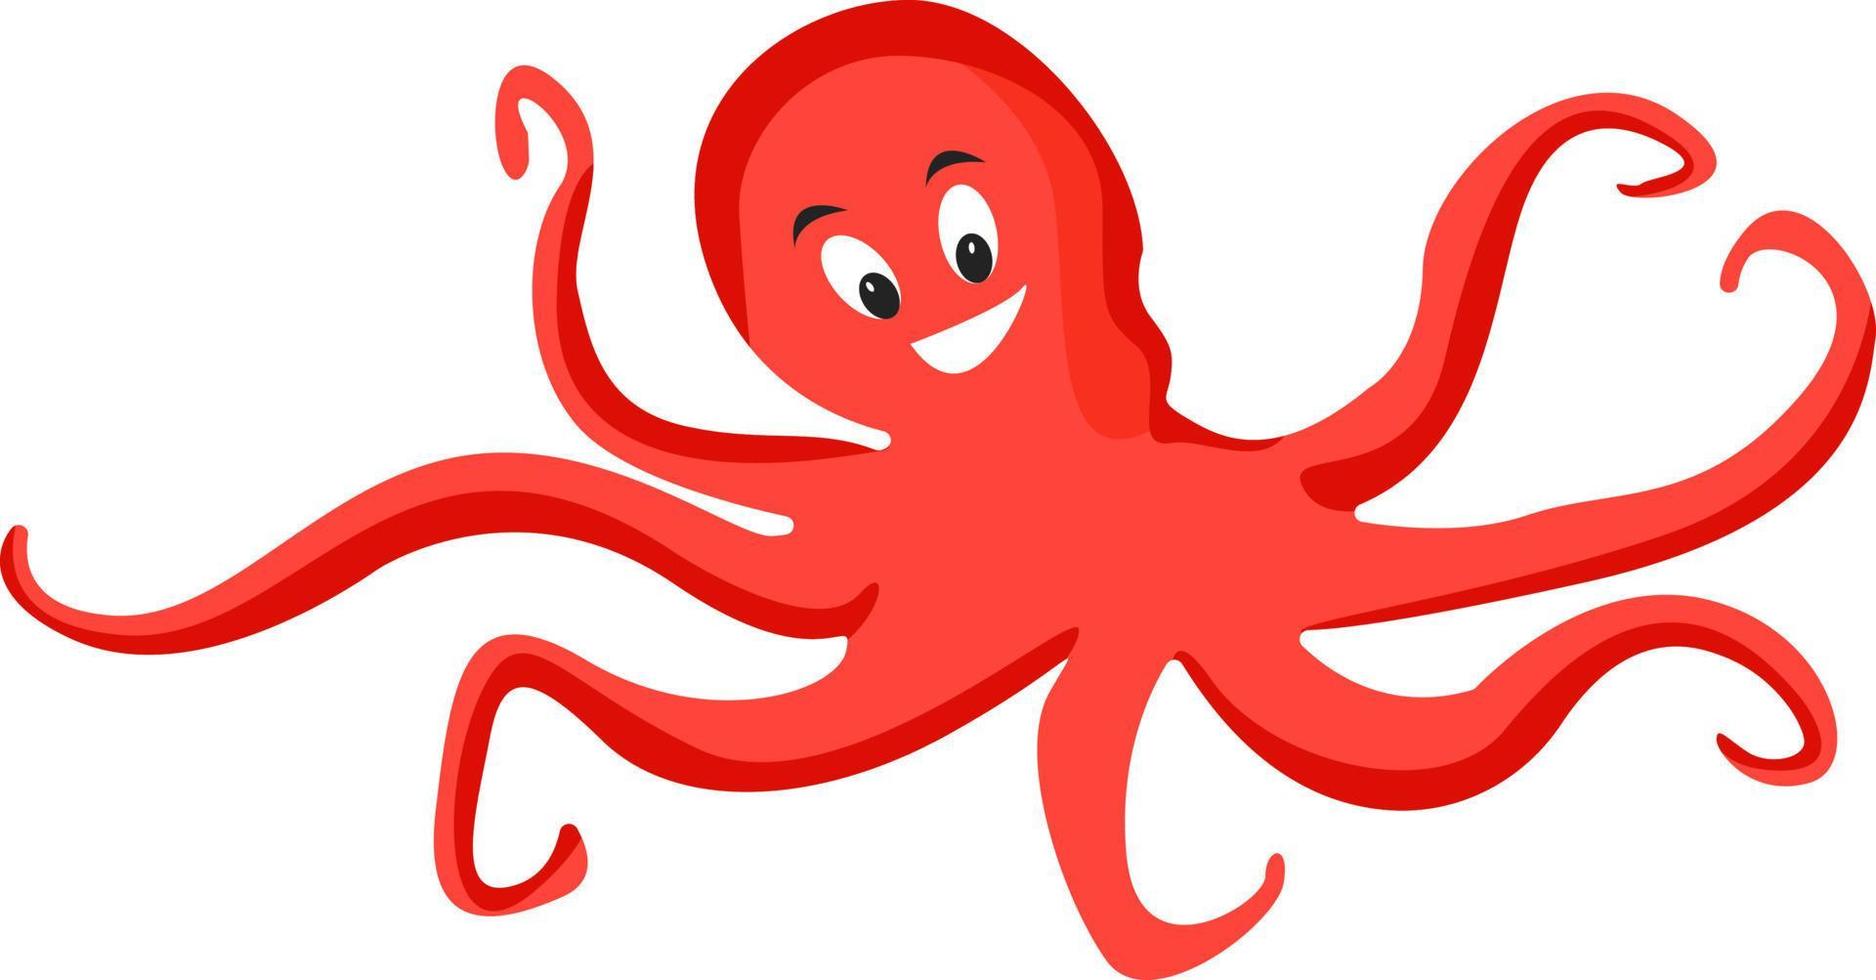 Happy octopus, illustration, vector on white background